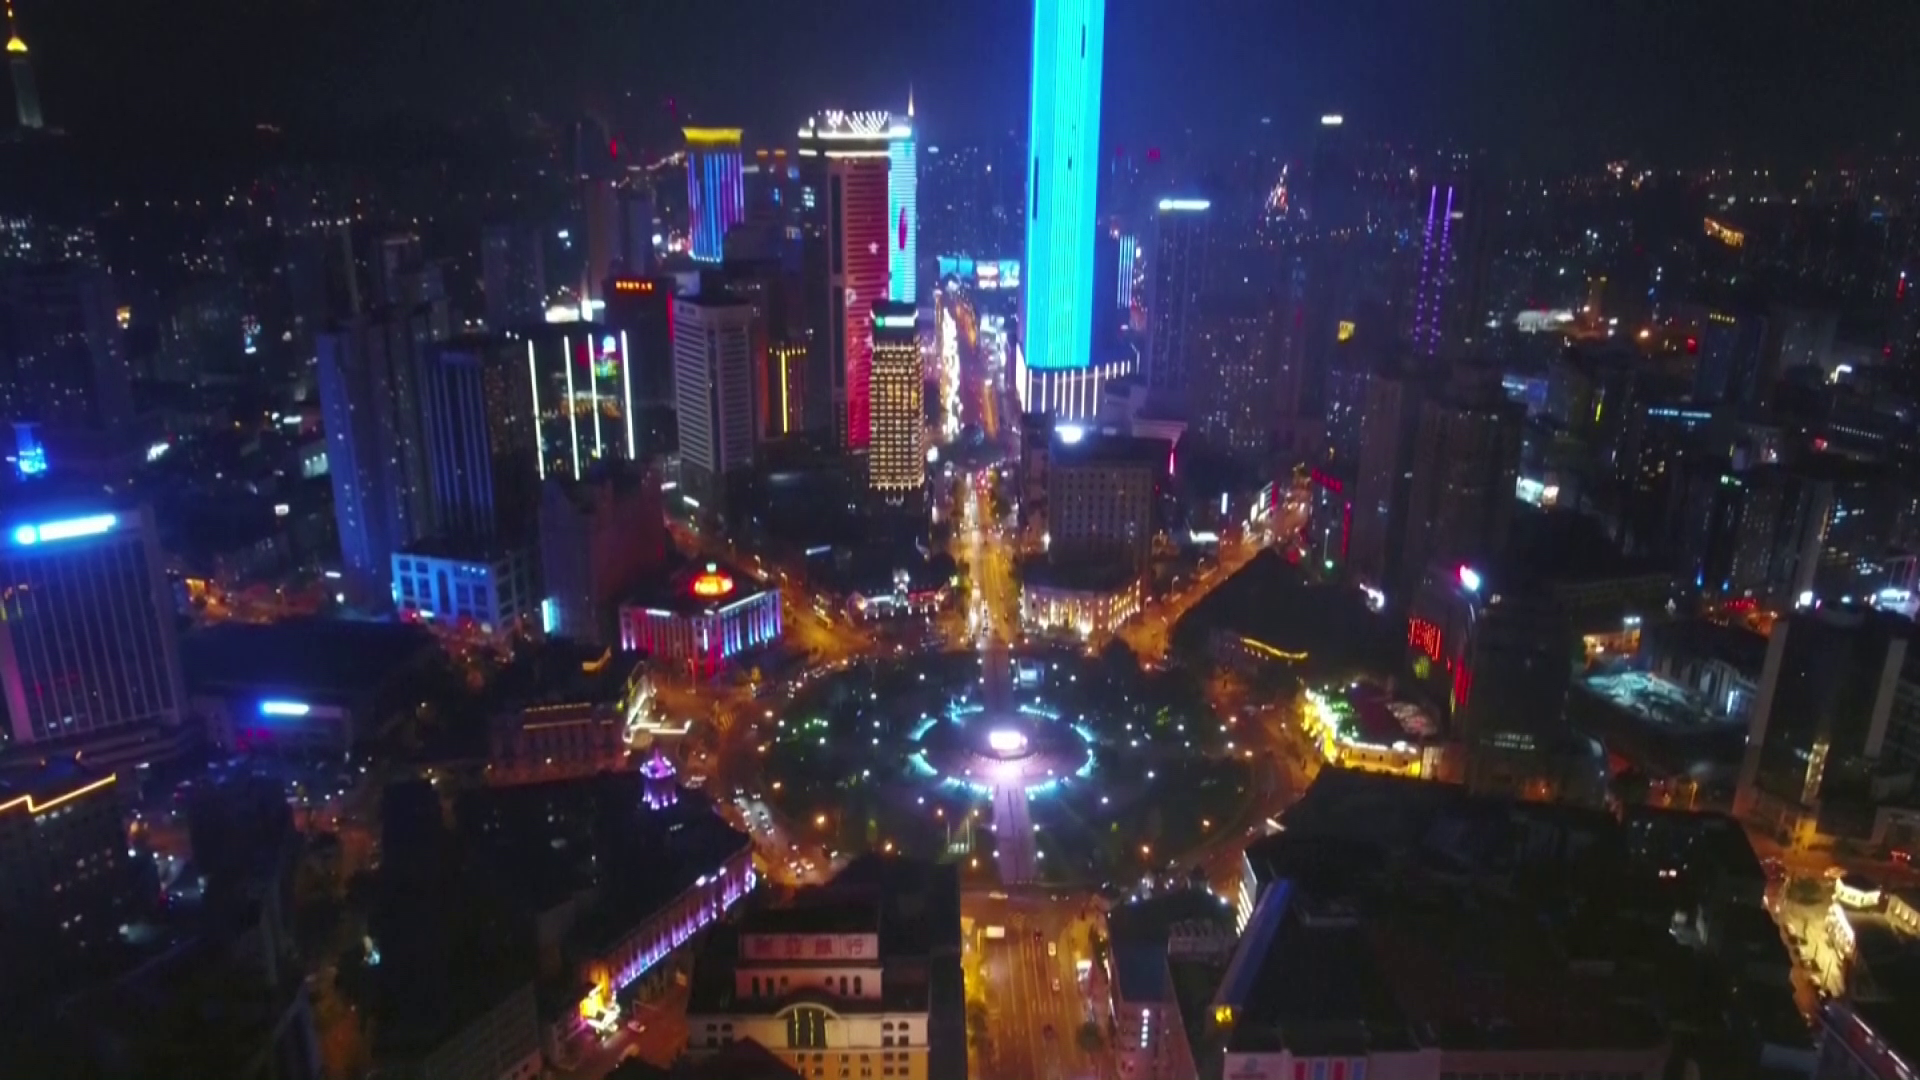 China marks ruling party's 100th anniversary with dazzling light shows